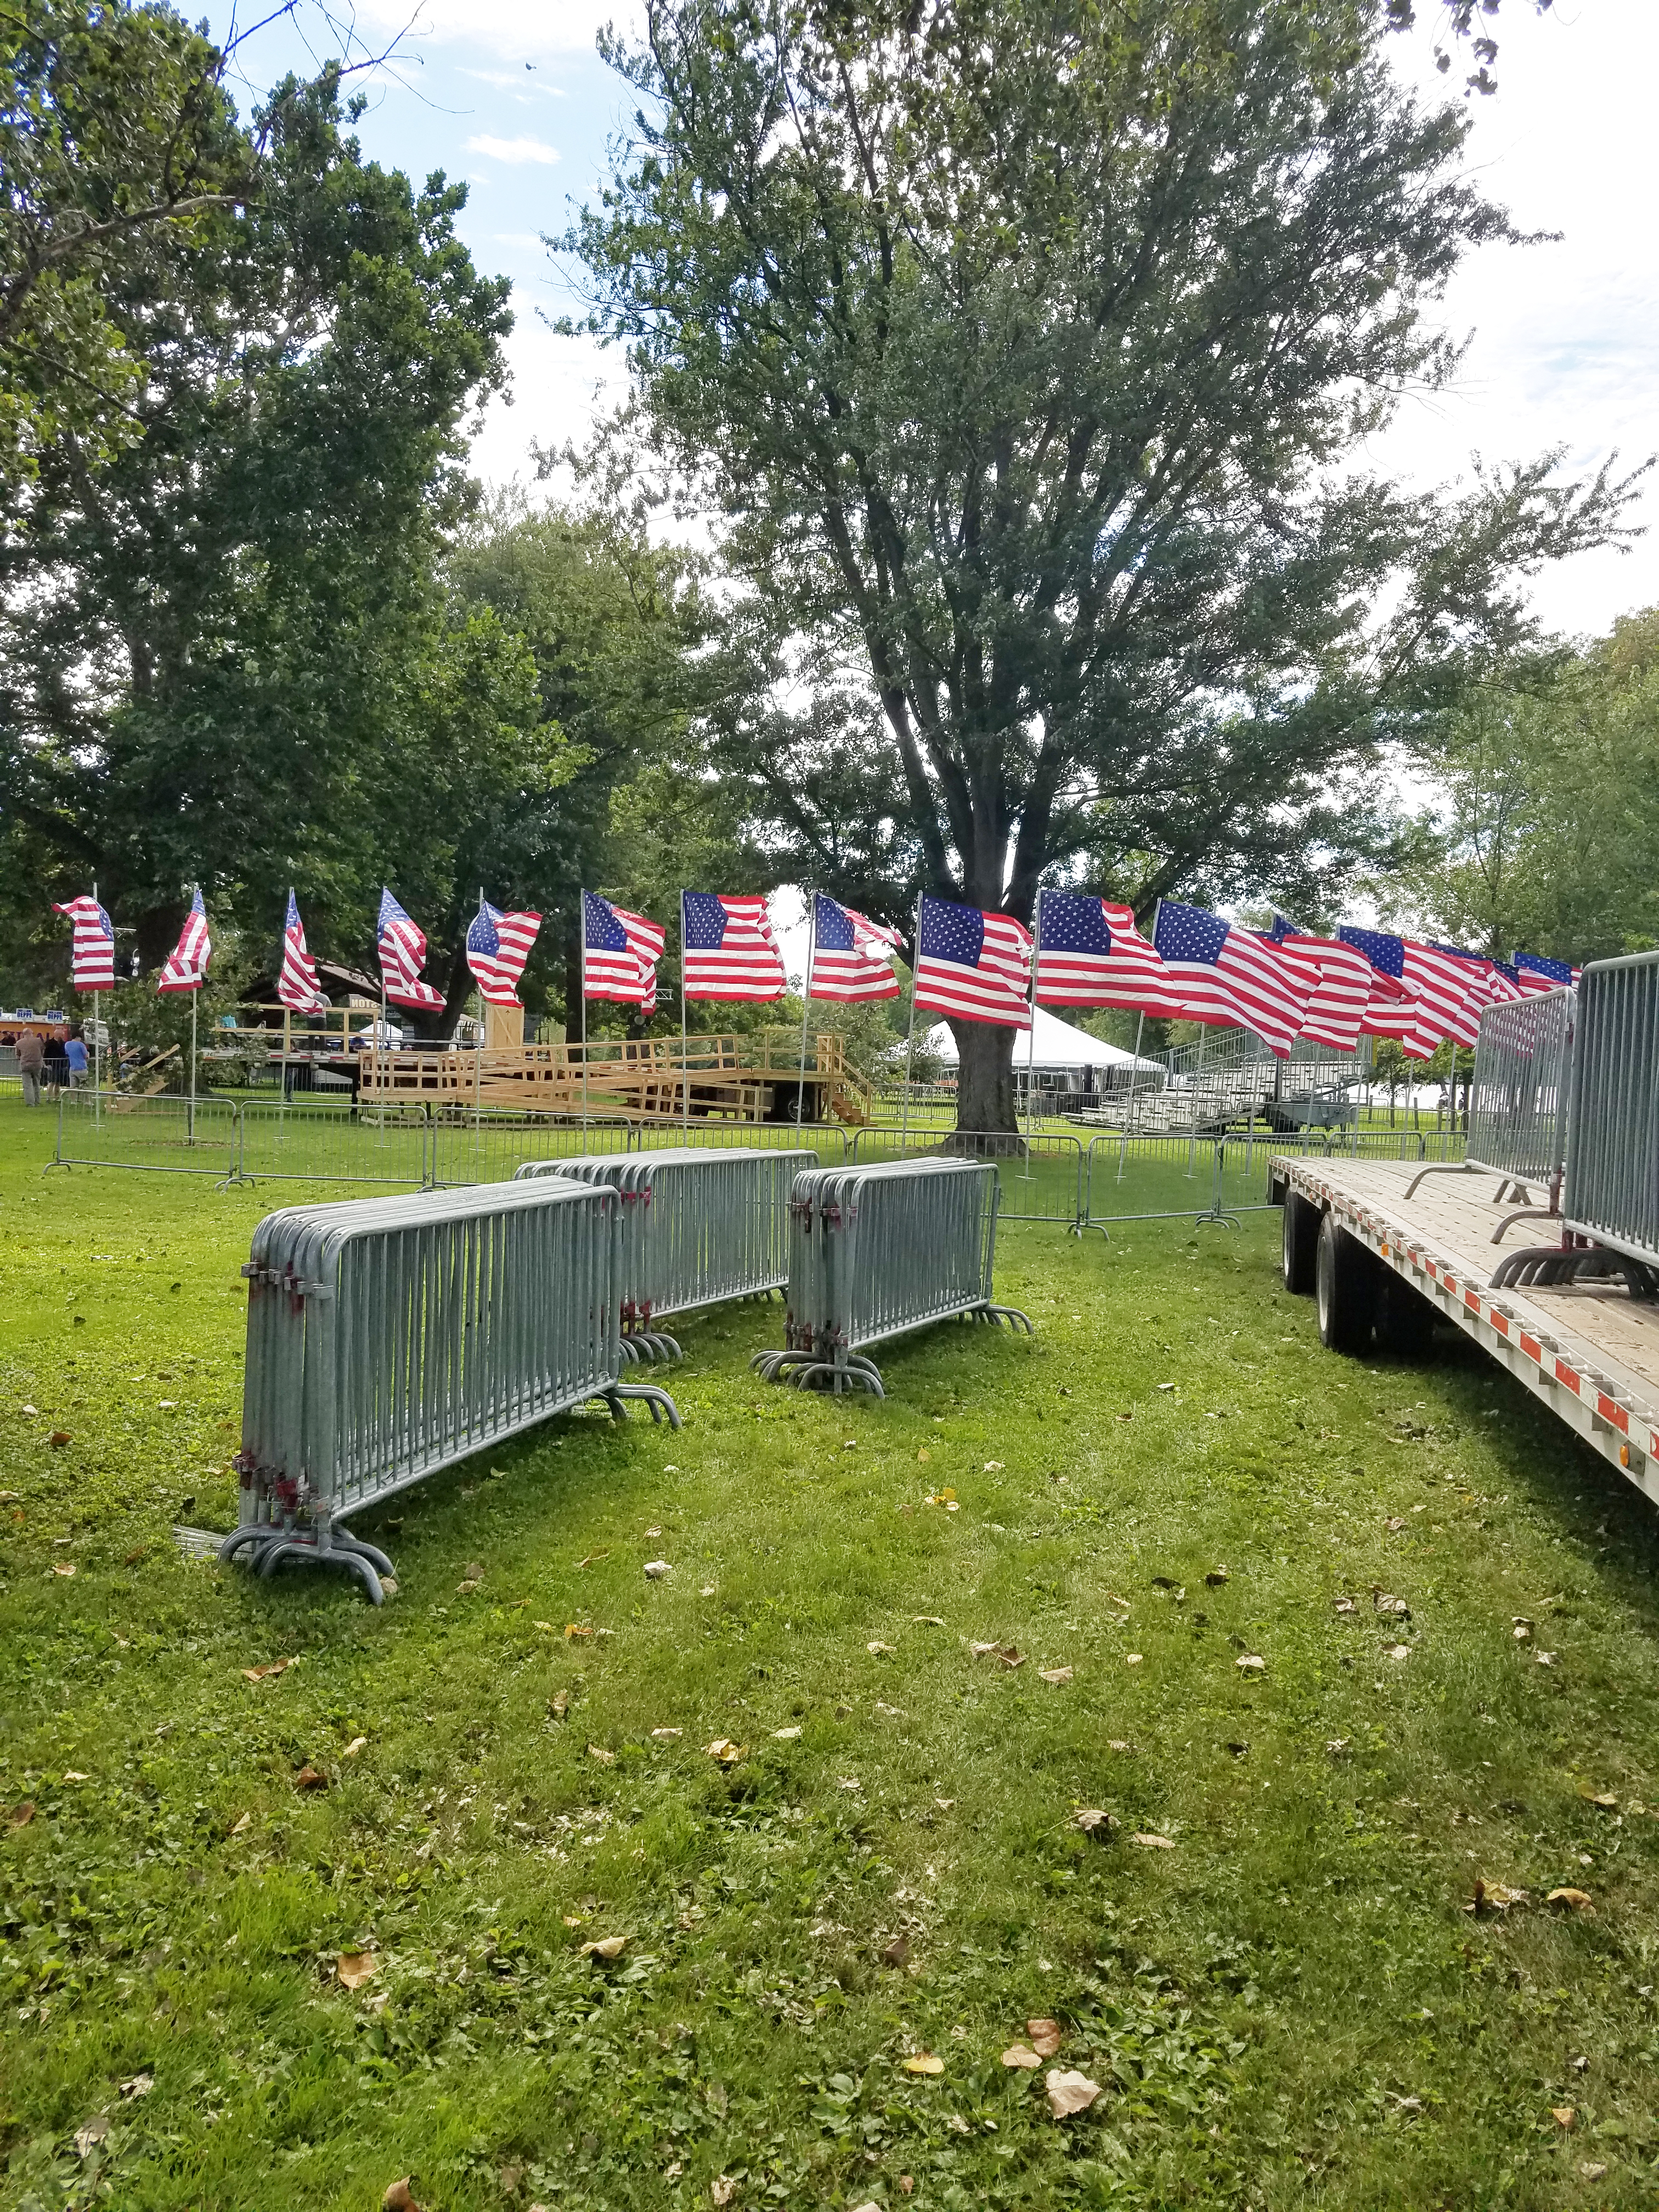 Crowd control barrier "Bike Rack" barricade at a political event for Hillary Clinton at Illiniwek Campground in Hampton, IL